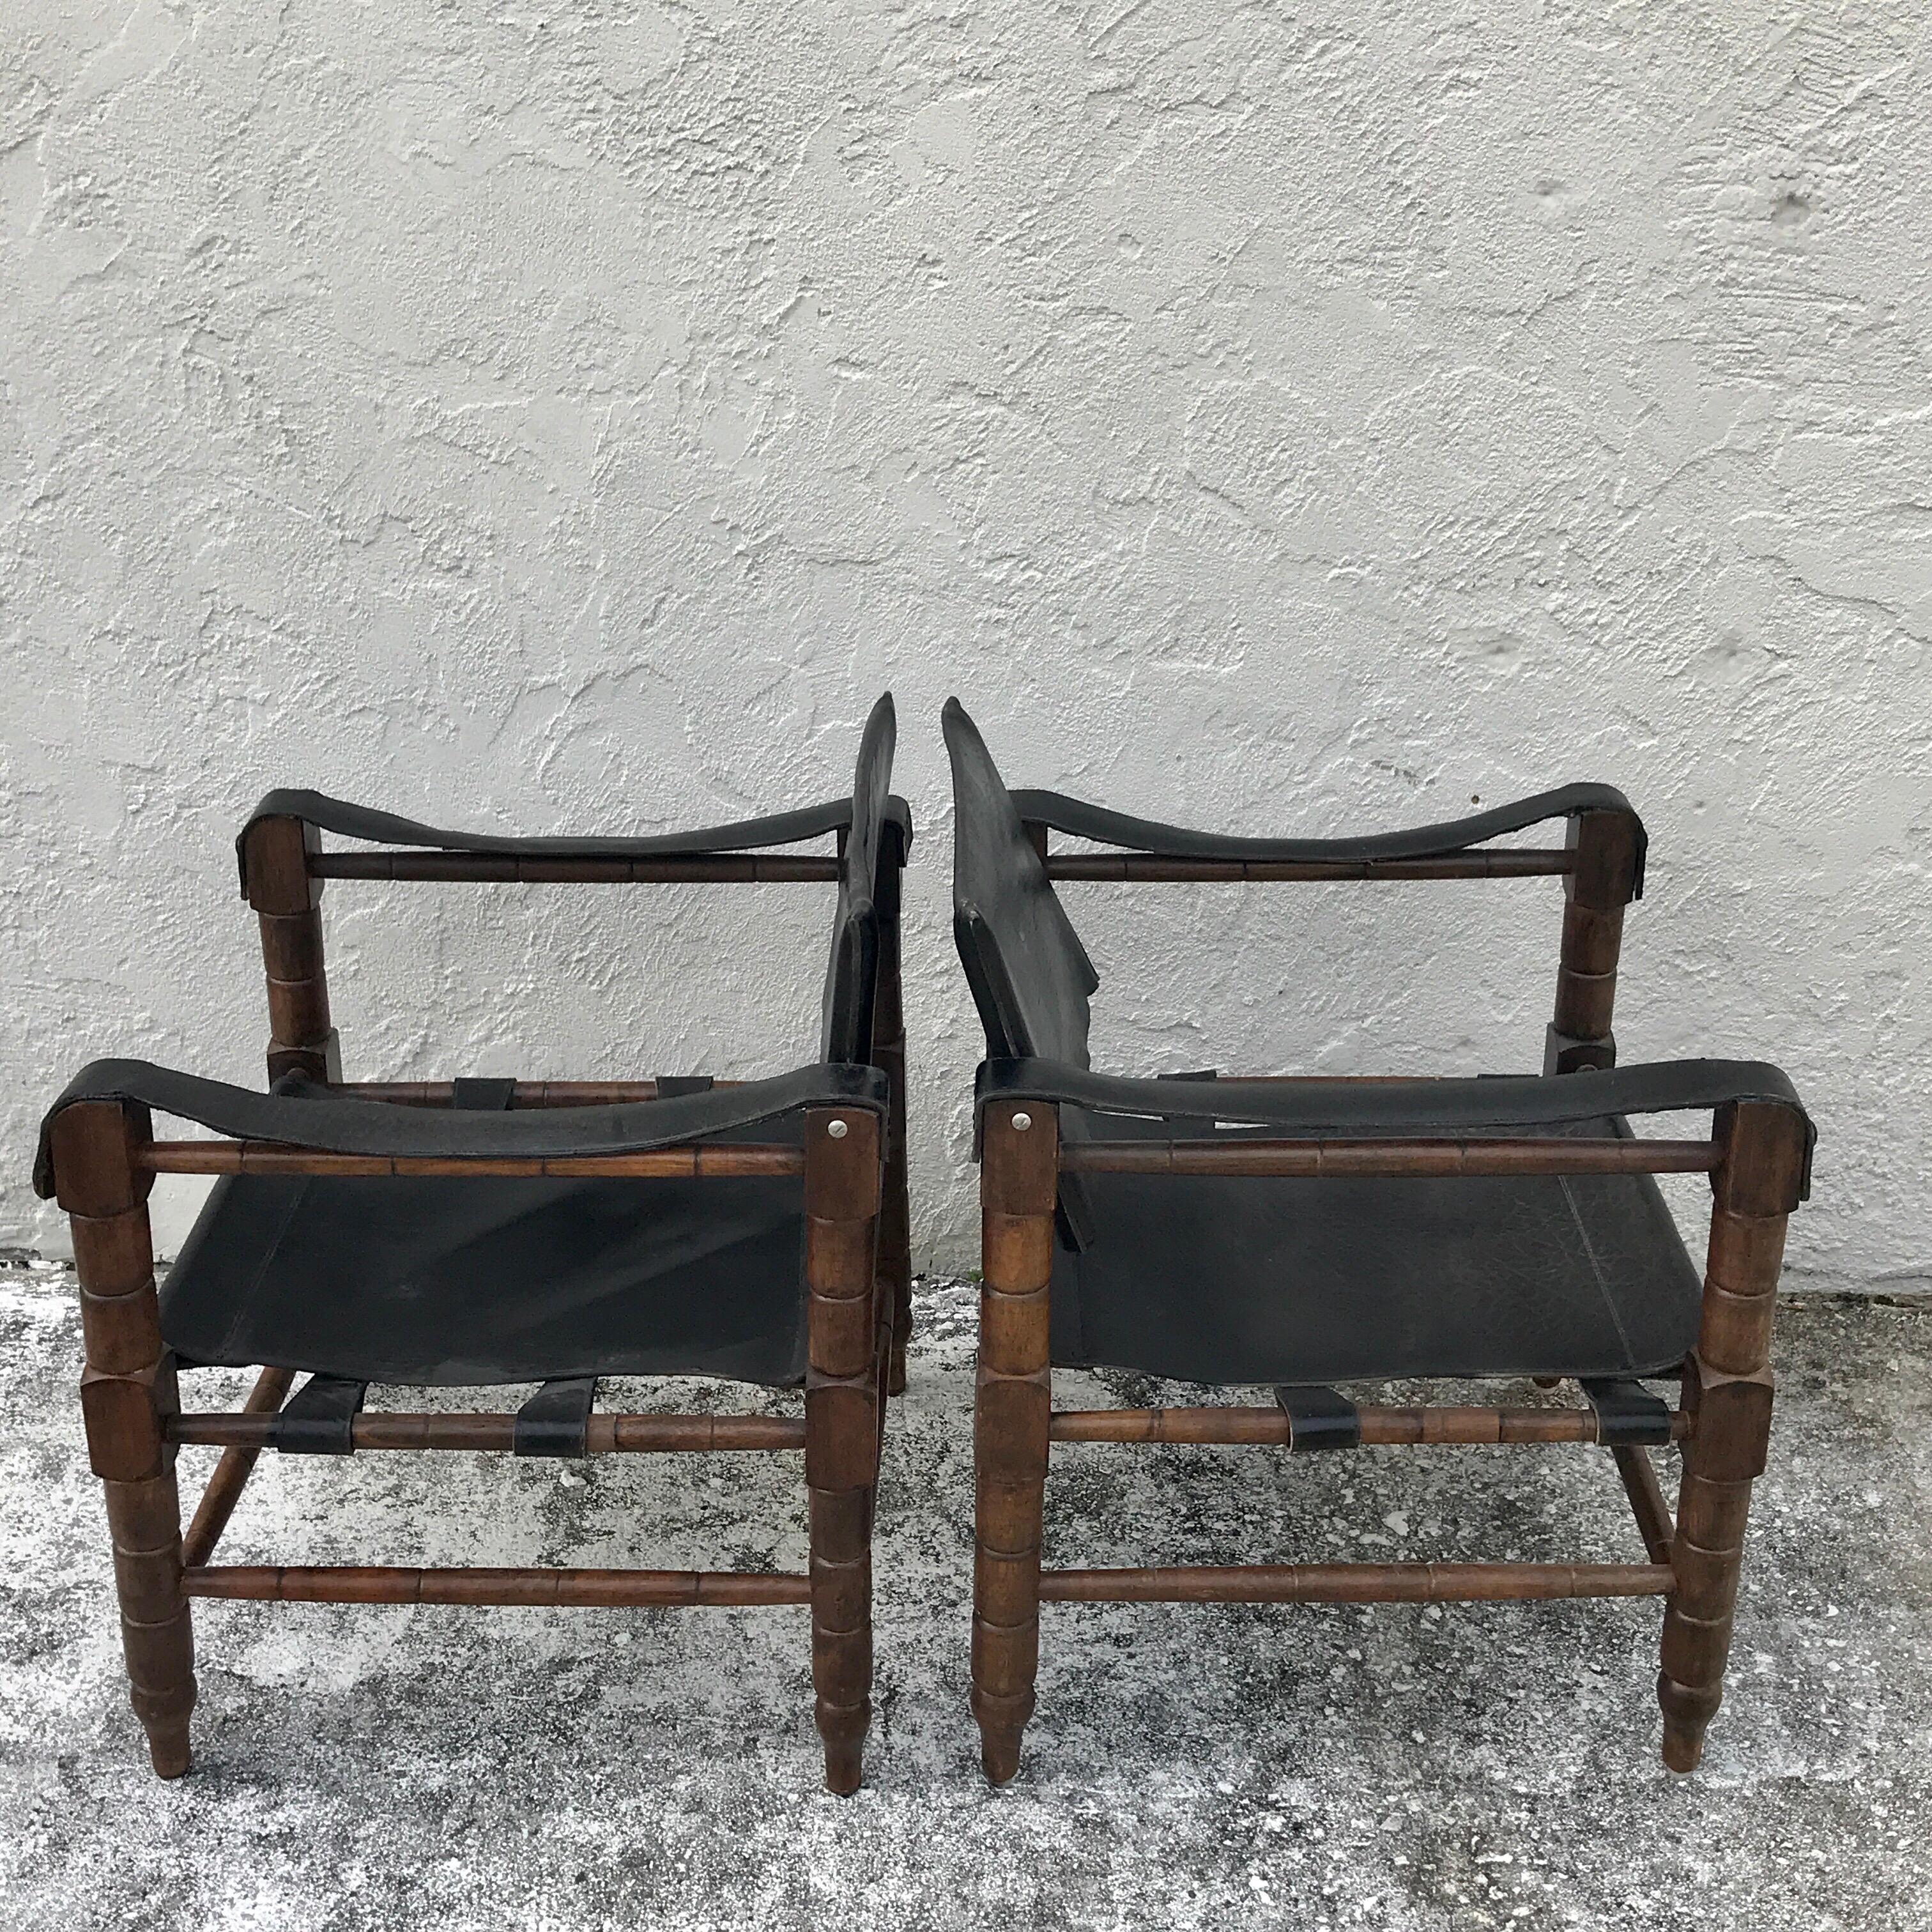 20th Century Pair of Syrian Leather Campaign / Safari Chairs